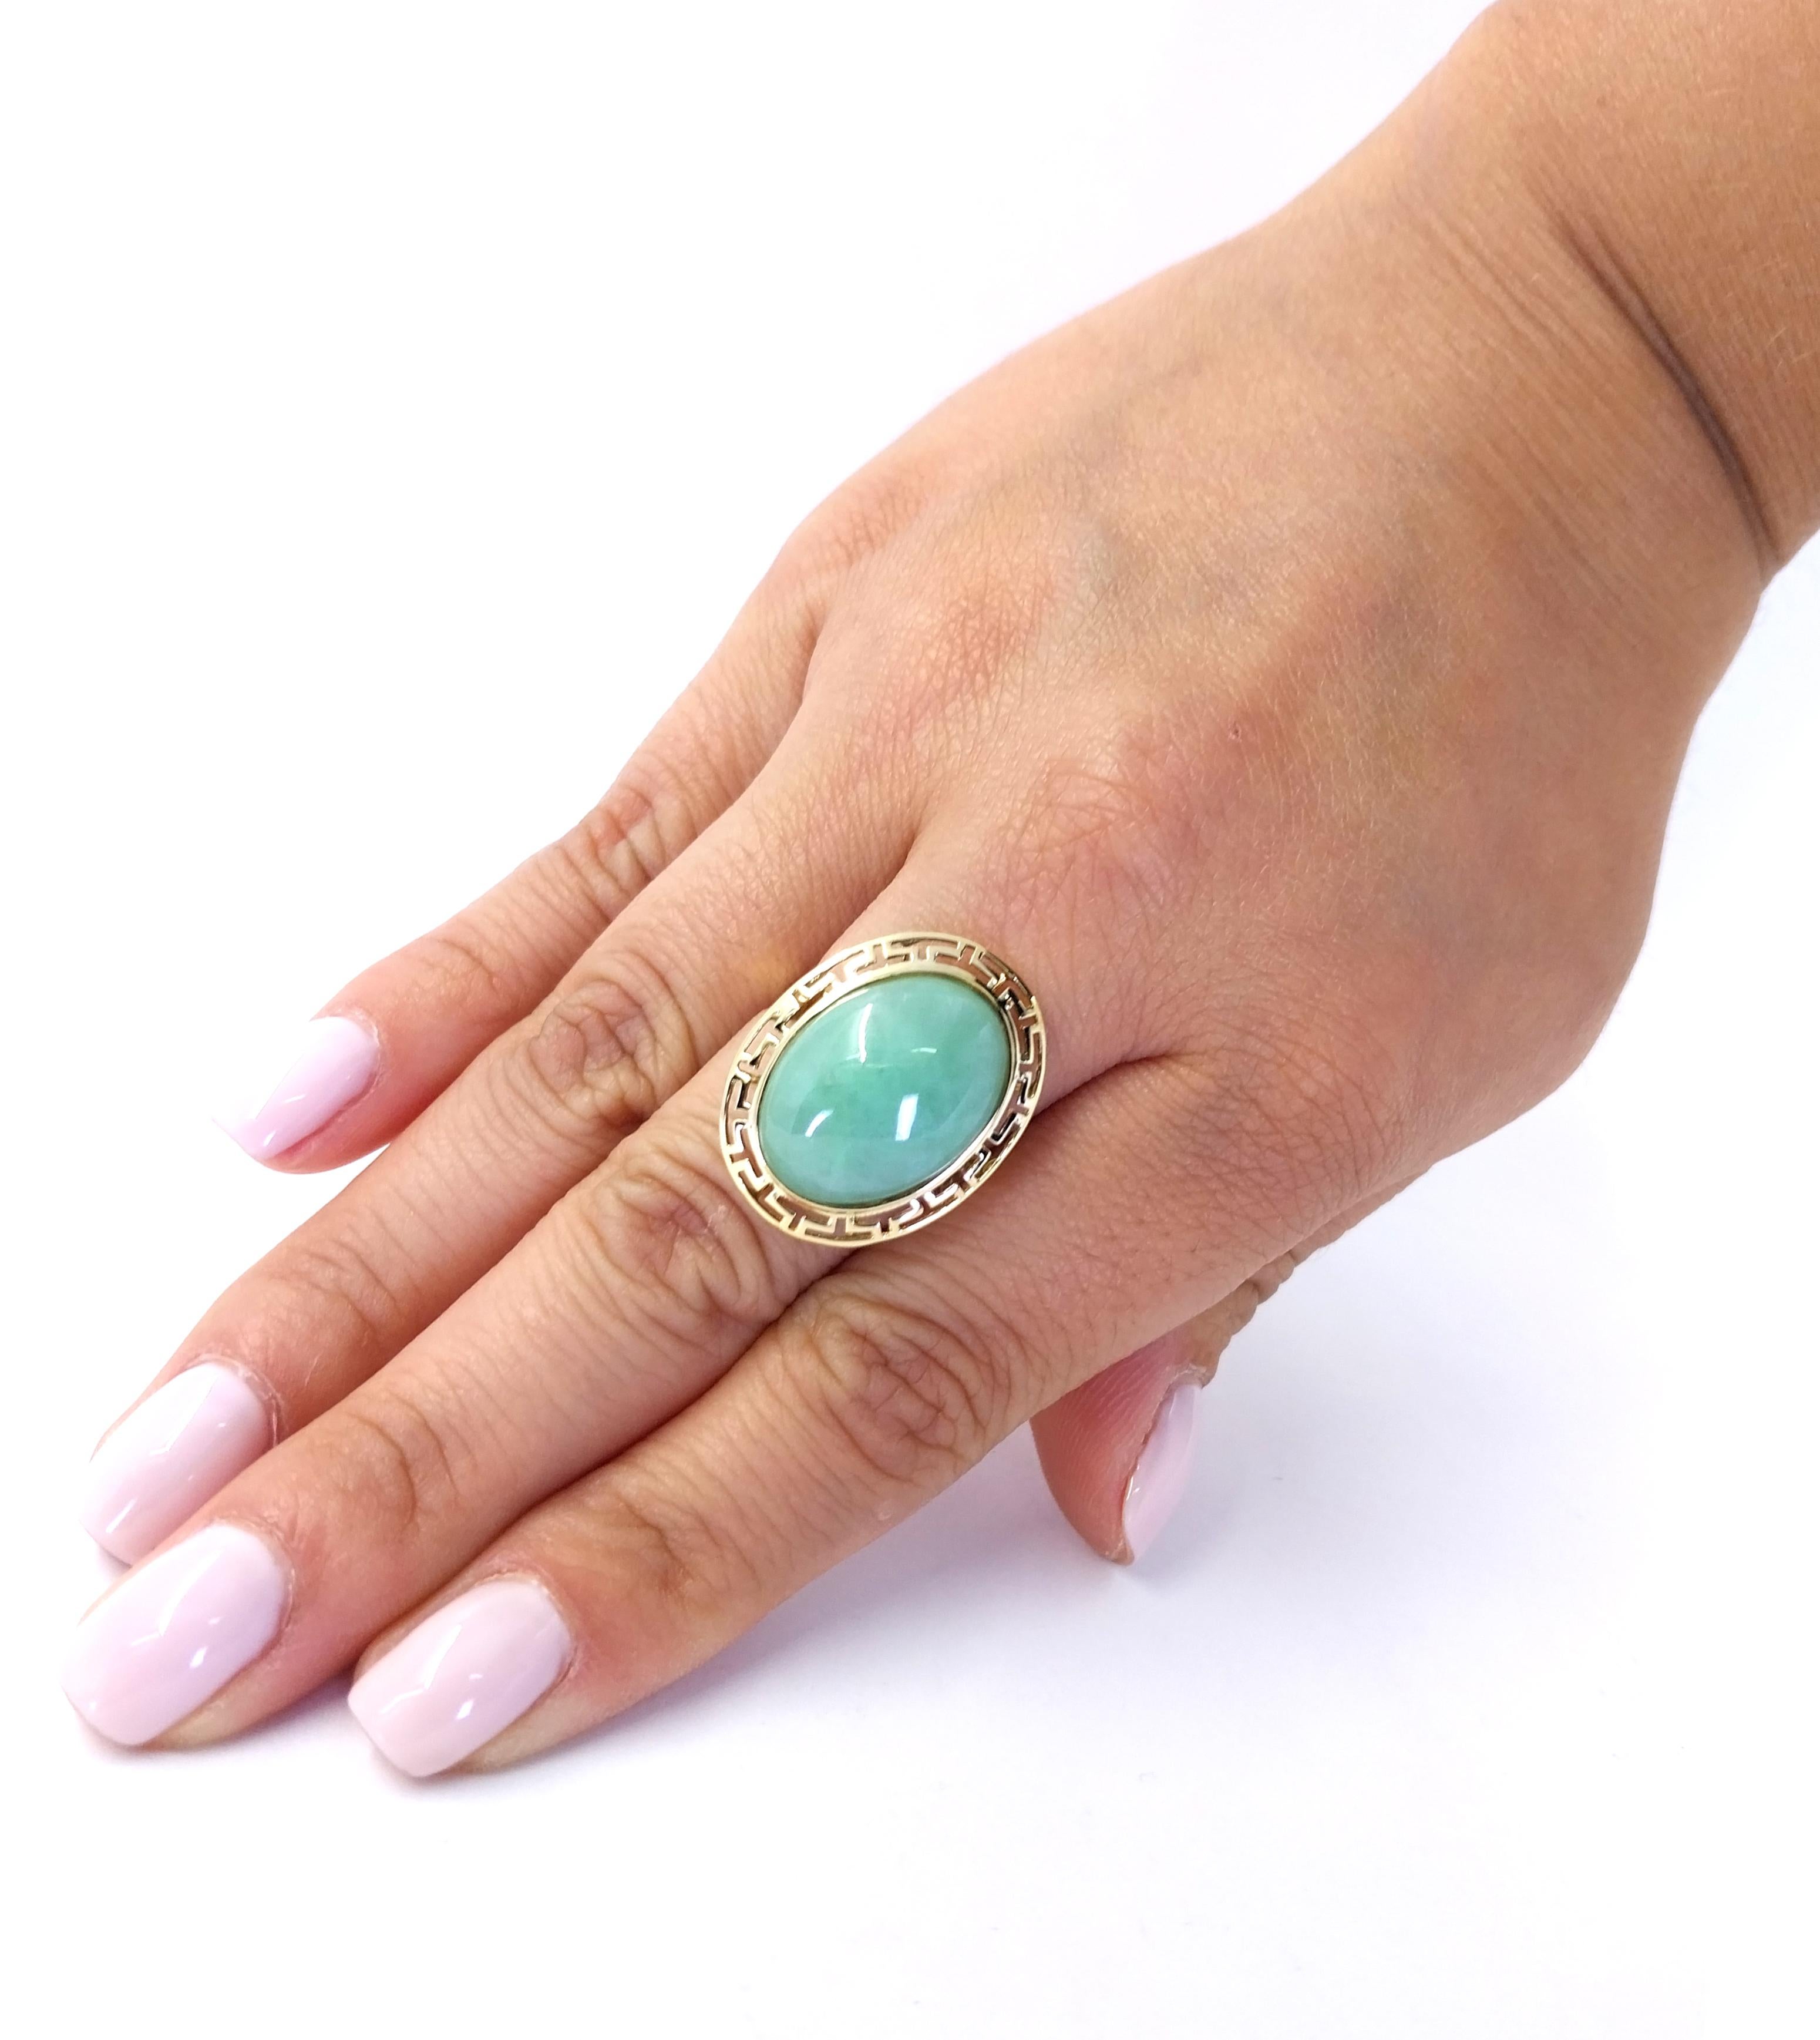 14 Karat Yellow Gold Ring Featuring An 18mm x 13mm Oval Cabochon Jade Surrounded with a Cutout Gold Border. Finger Size 7.5. Finished Weight is 4.2 Grams.

Matching earrings available separately.